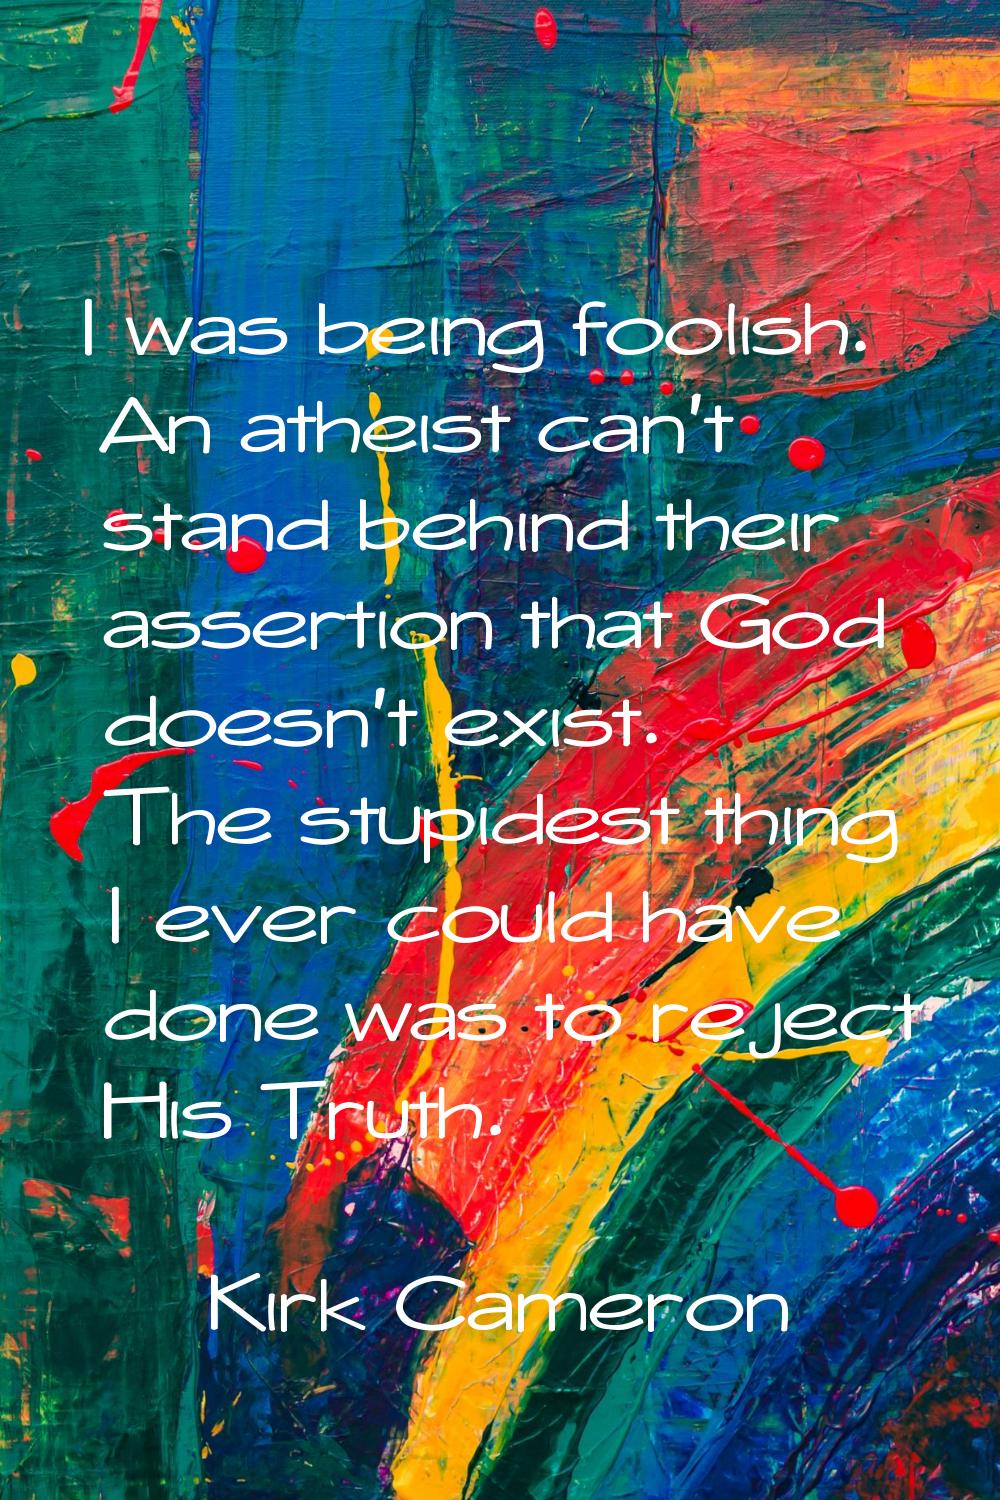 I was being foolish. An atheist can't stand behind their assertion that God doesn't exist. The stup